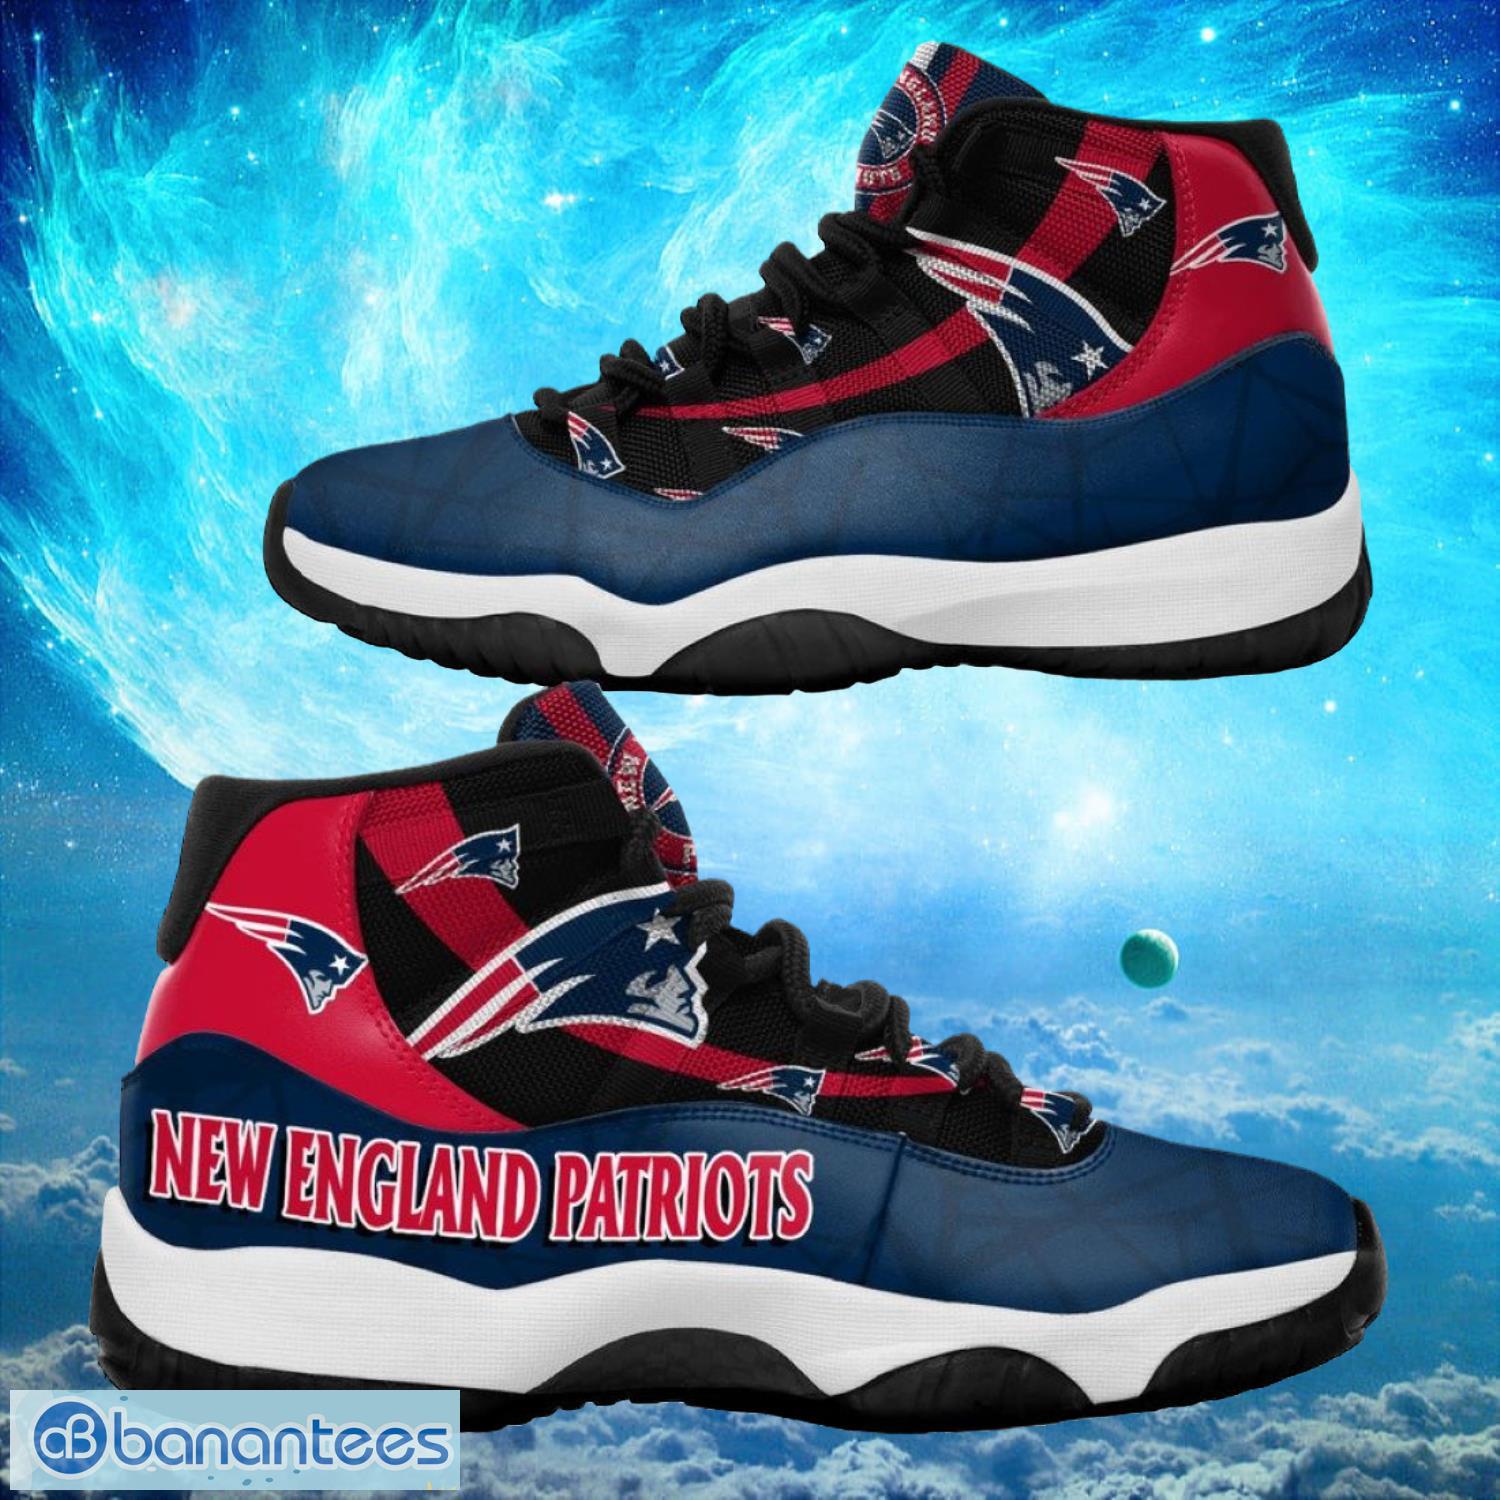 New England Patriots NFL Air Jordan 11 Sneakers Shoes Gift For Fans Product Photo 1